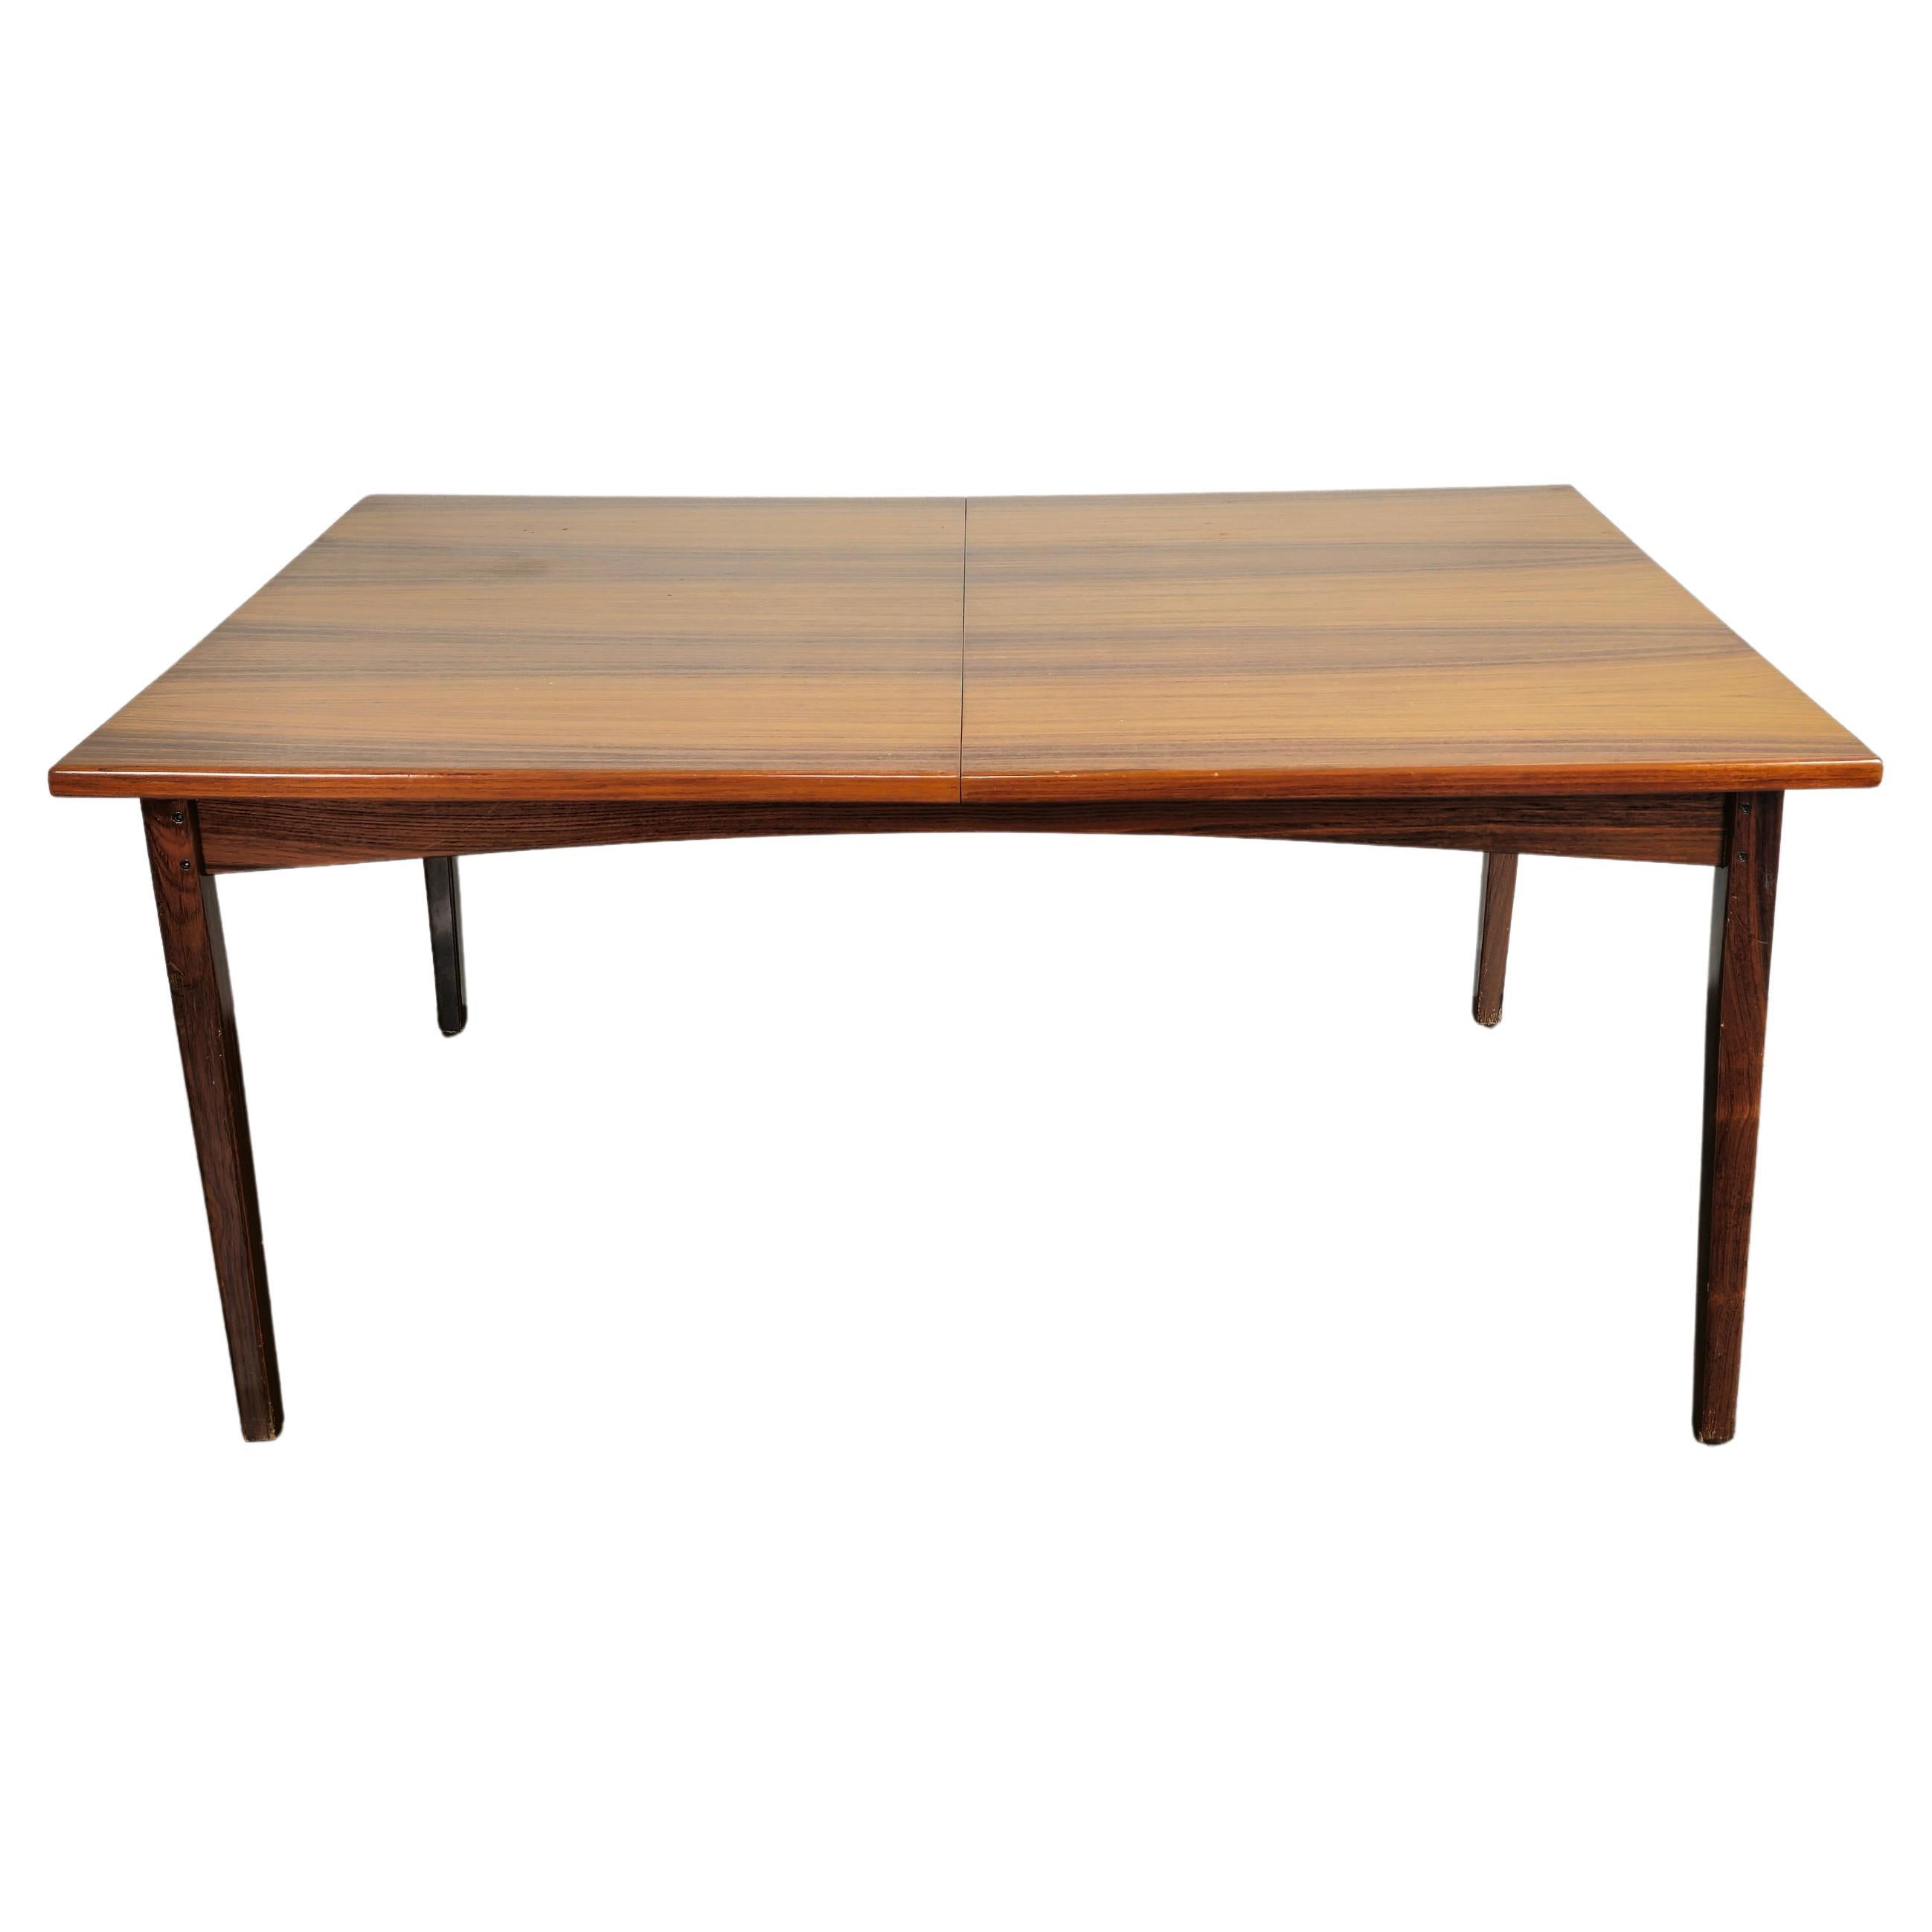 Wood Dining Room Table Extendable Large Rectangular Midcentury, Denmark, 1960s For Sale